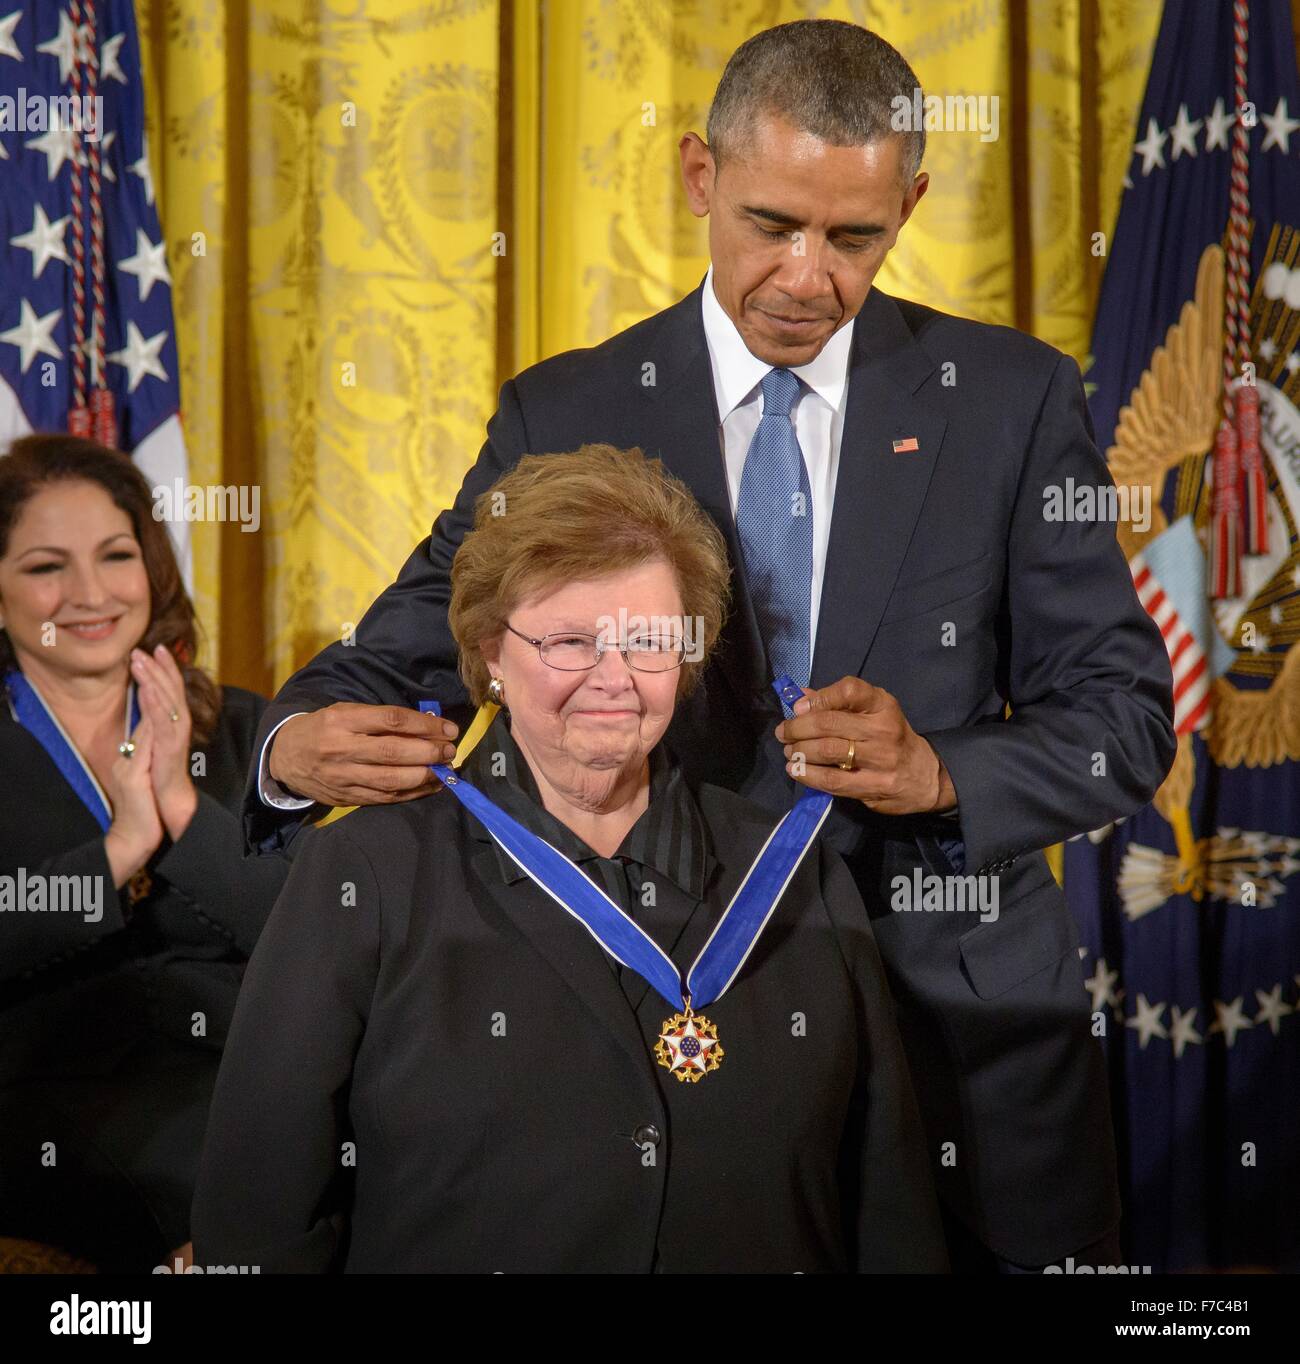 U.S. President Barack Obama presents Sen. Barbara Mikulski with the Presidential Medal of Freedom during a ceremony in the East Room of the White House November 24, 2015 in Washington, DC. Stock Photo